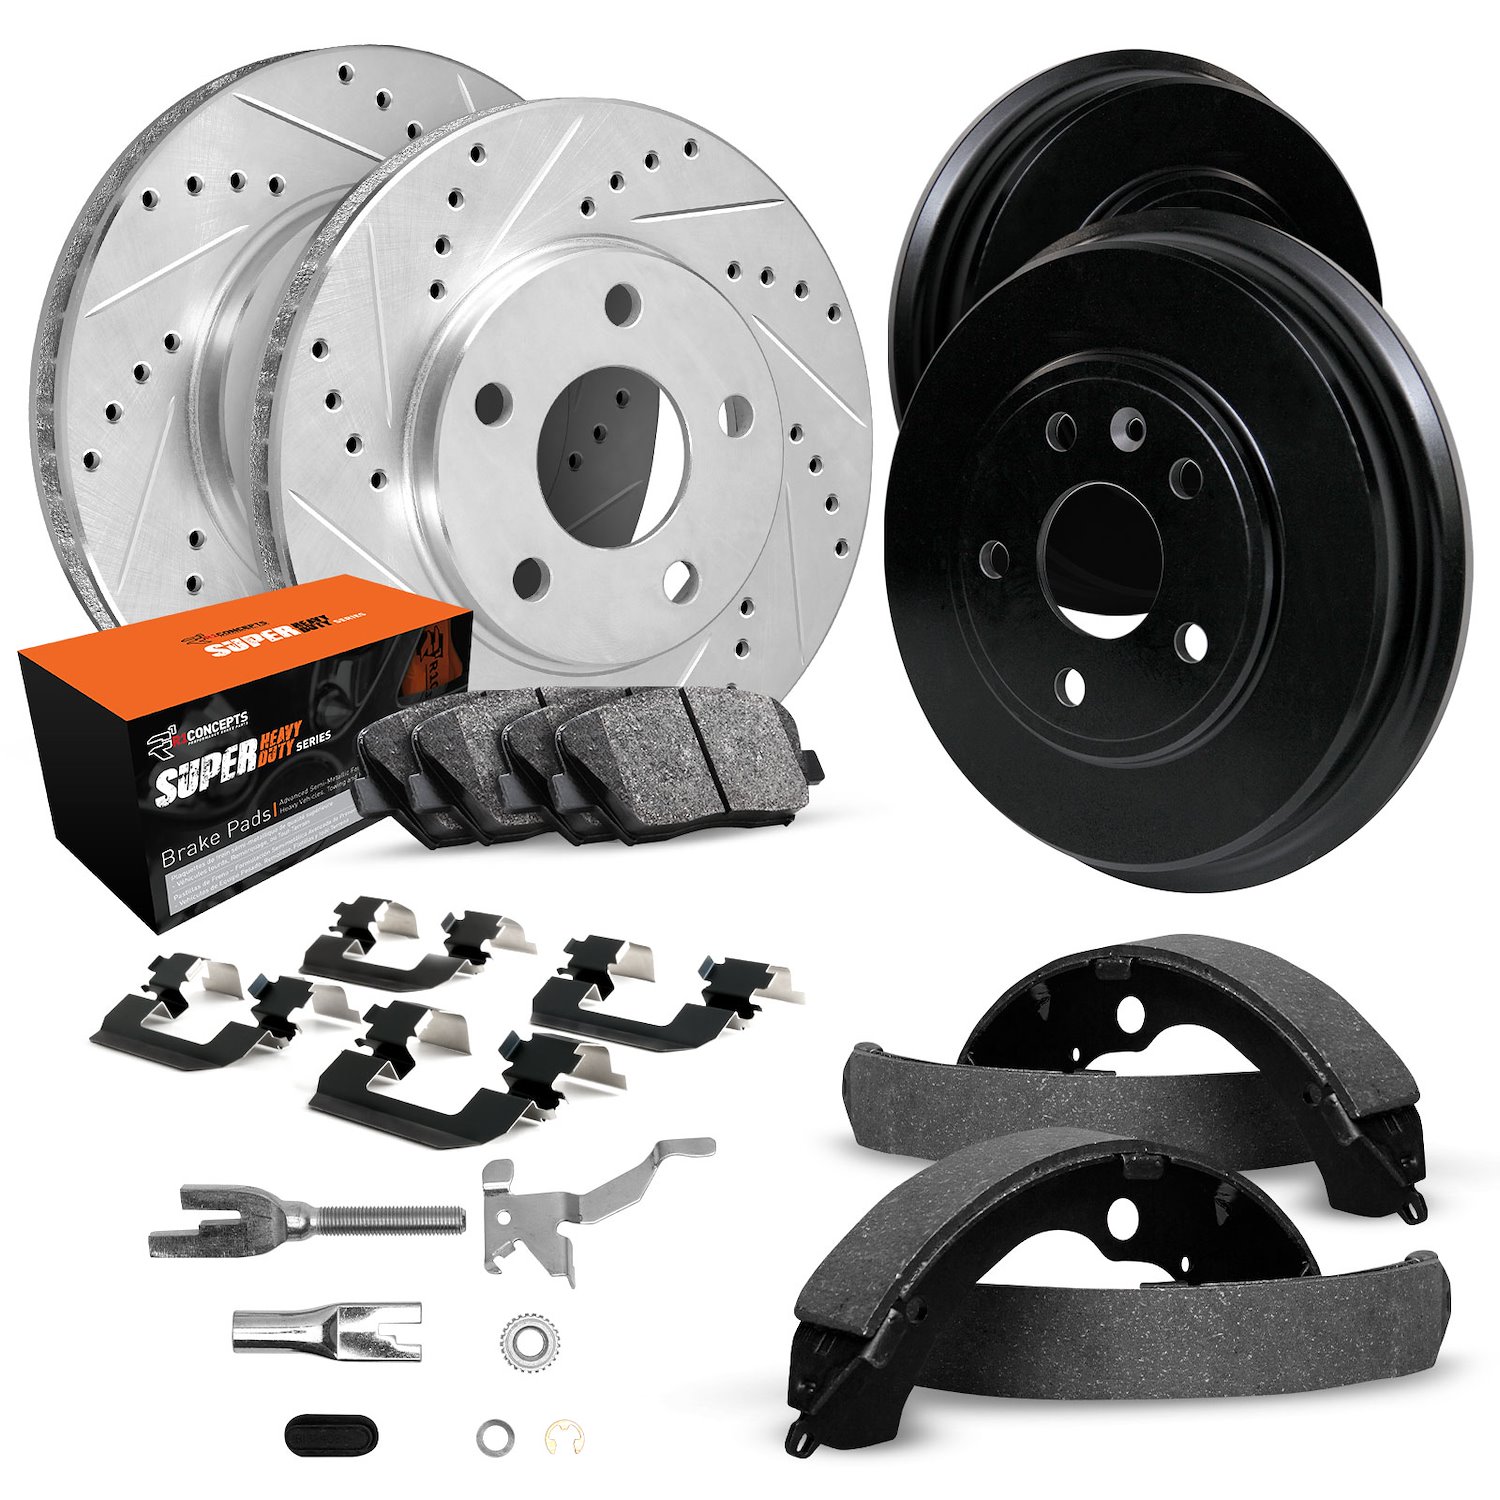 E-Line Drilled/Slotted Silver Rotor & Drum Set w/Super-Duty Pads, Shoes/Hardware/Adjusters, 1997-1998 Mopar